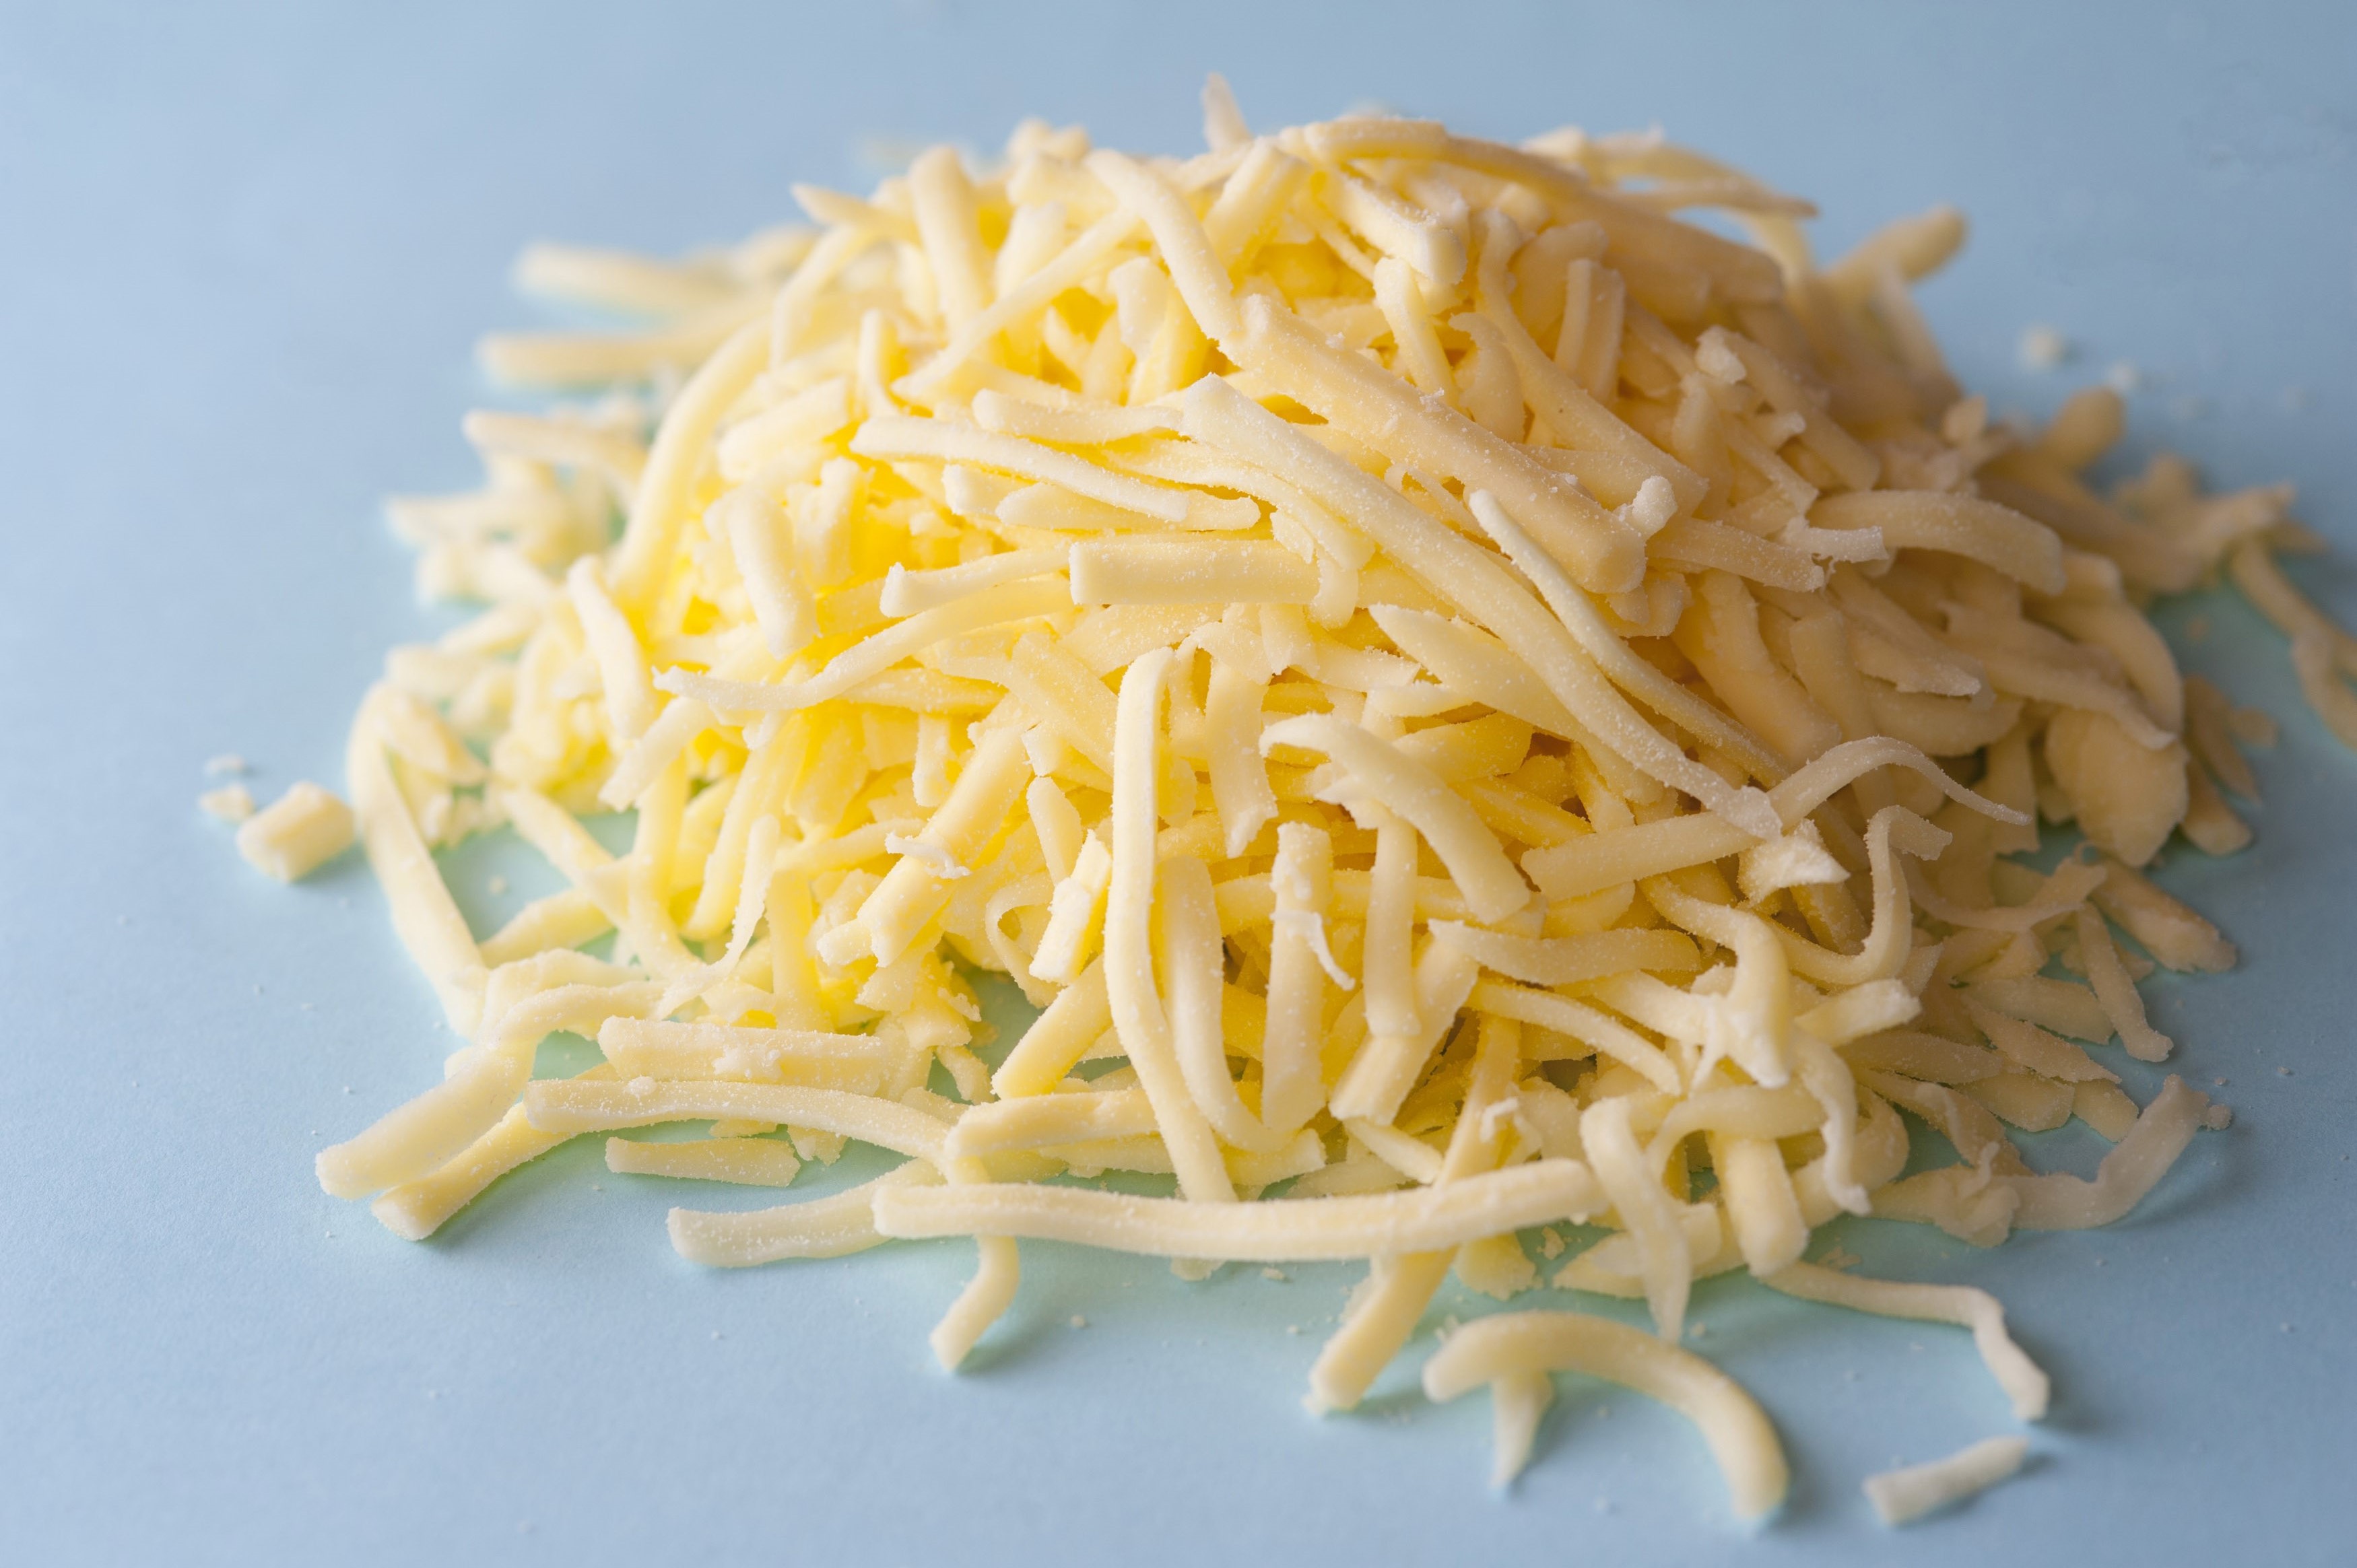 Grated cheddar cheese Stock Image